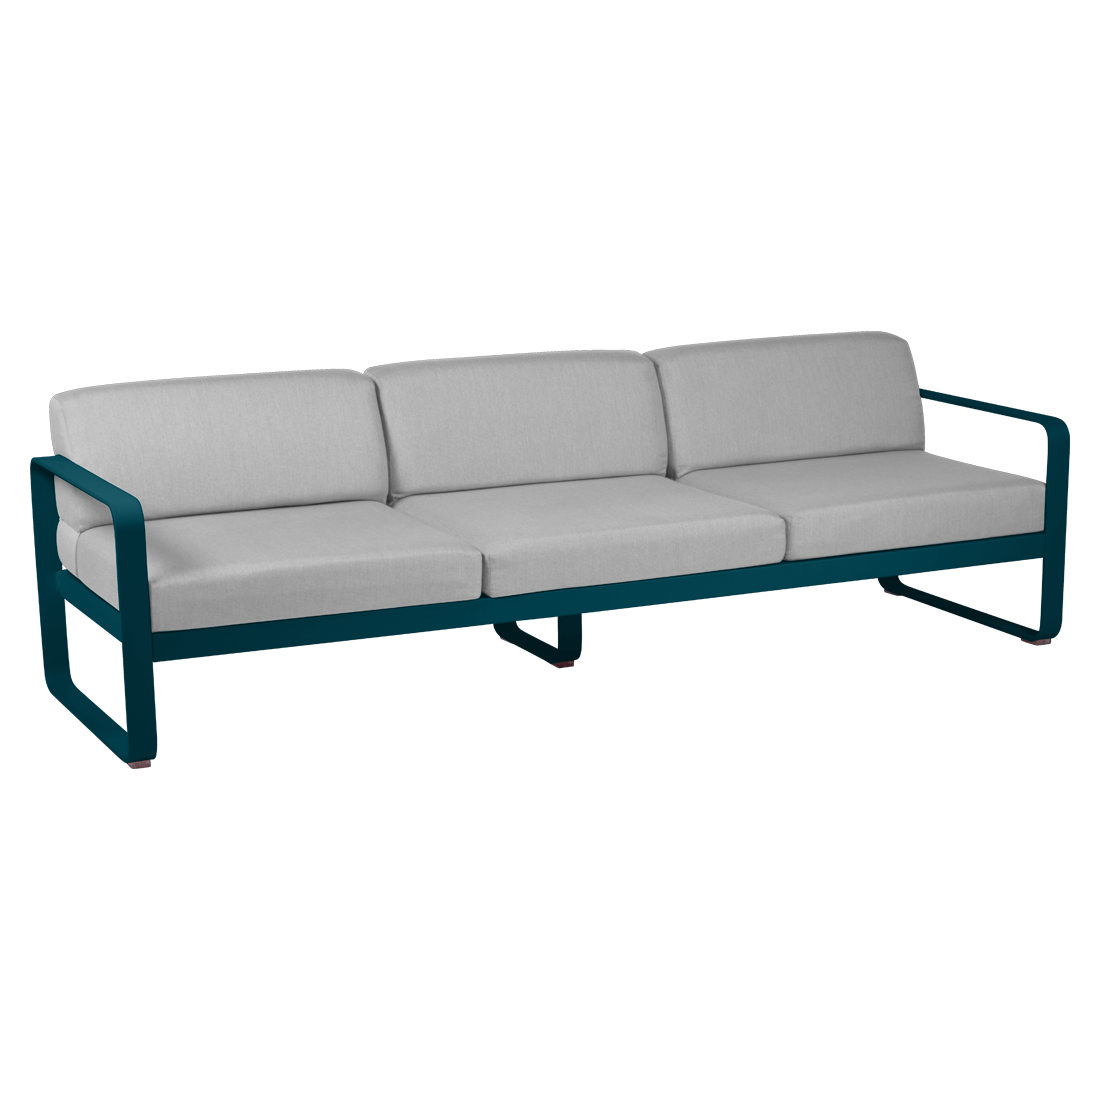 FERMOB Bellevie 3-Seater Outdoor Sofa with Grey Cushions